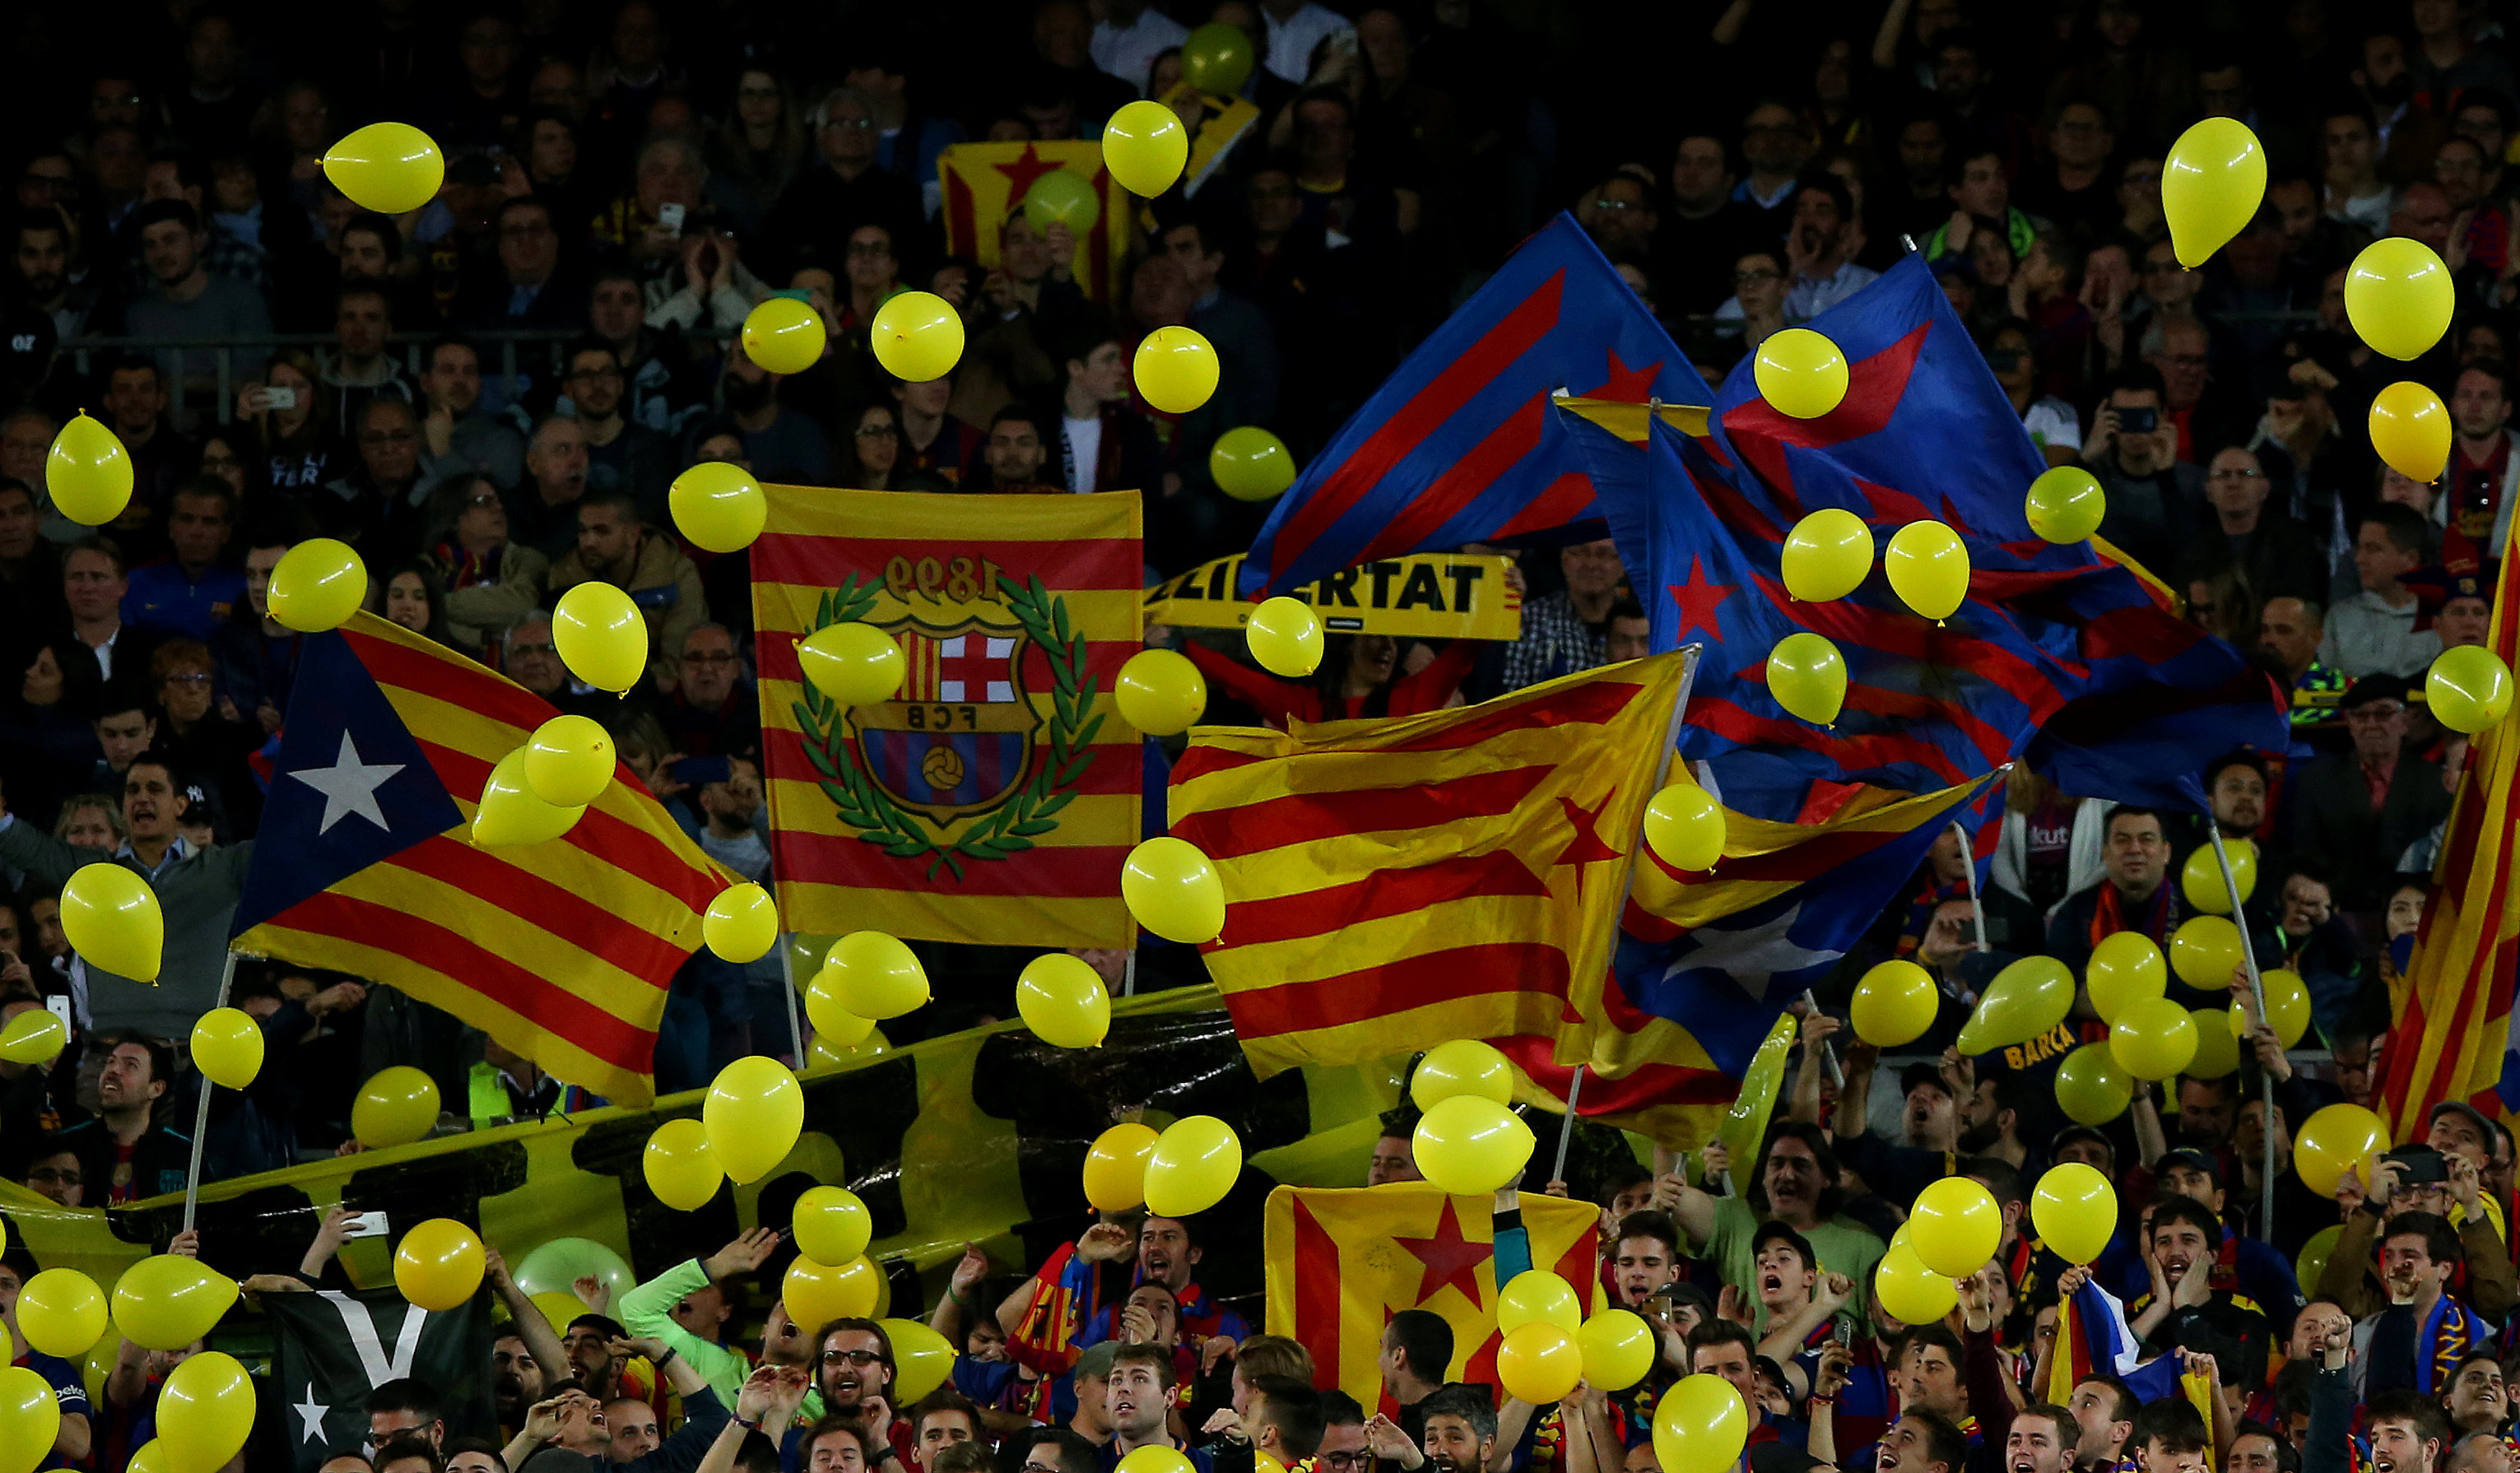 Barça fans throw yellow balloons onto the pitch at Camp Nou (courtesy of Reuters)